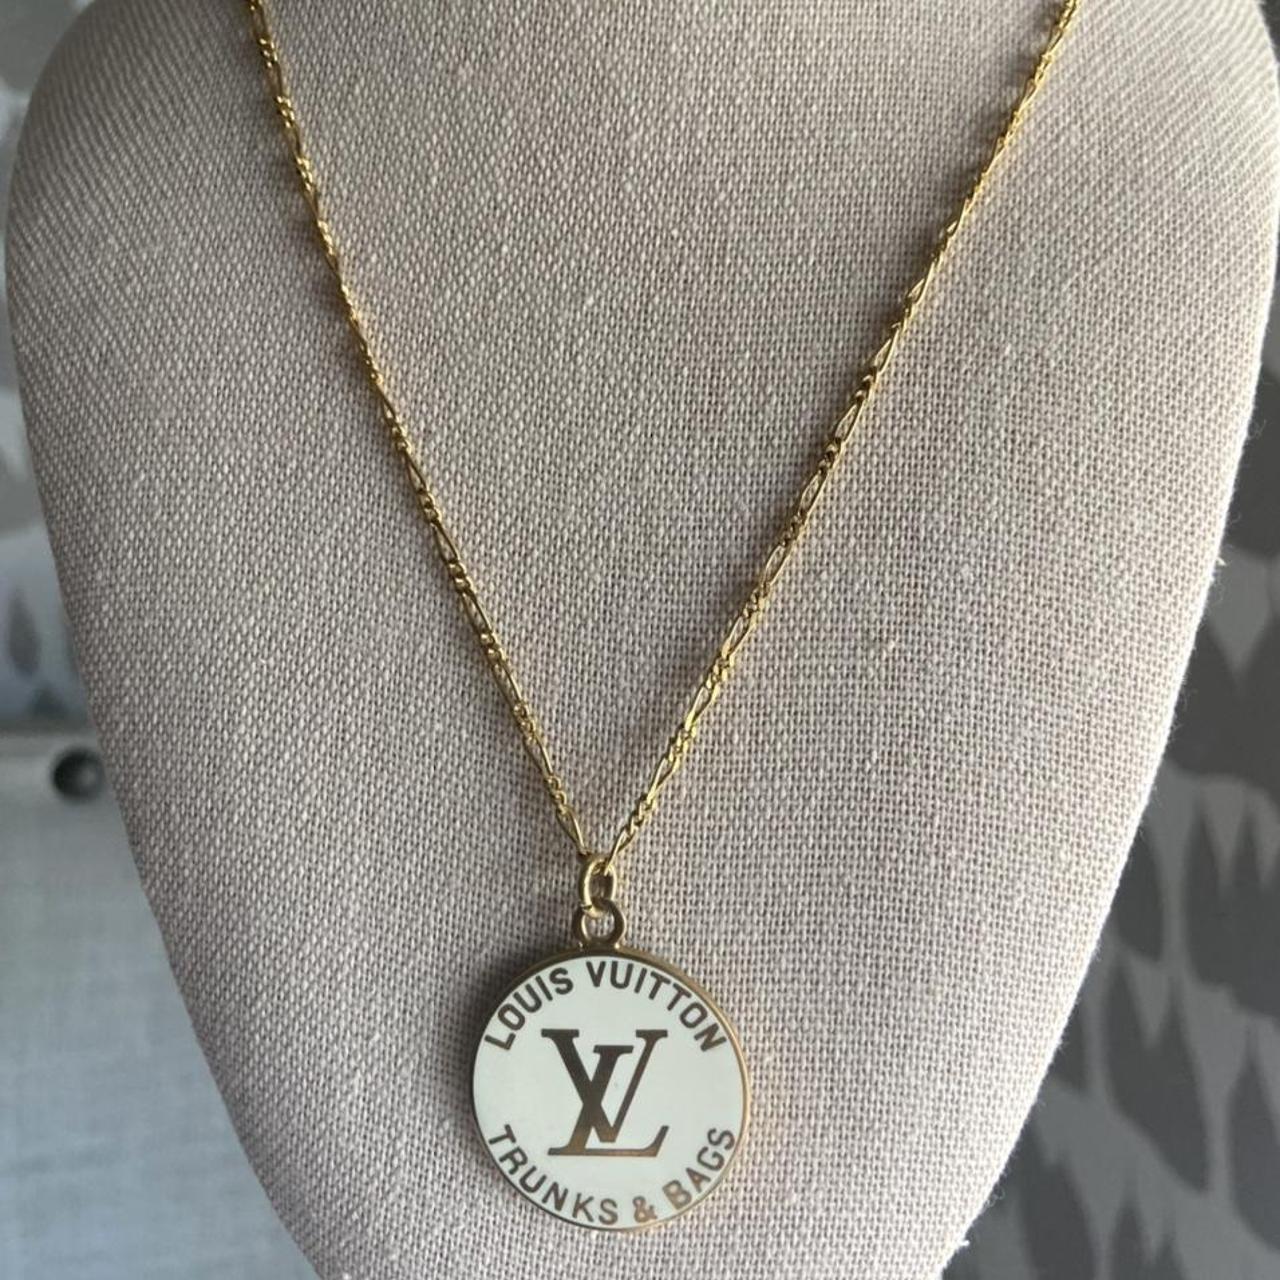 LOUIS VUITTON CHAIN LINKS PATCHES NECKLACE/ /Weared - Depop